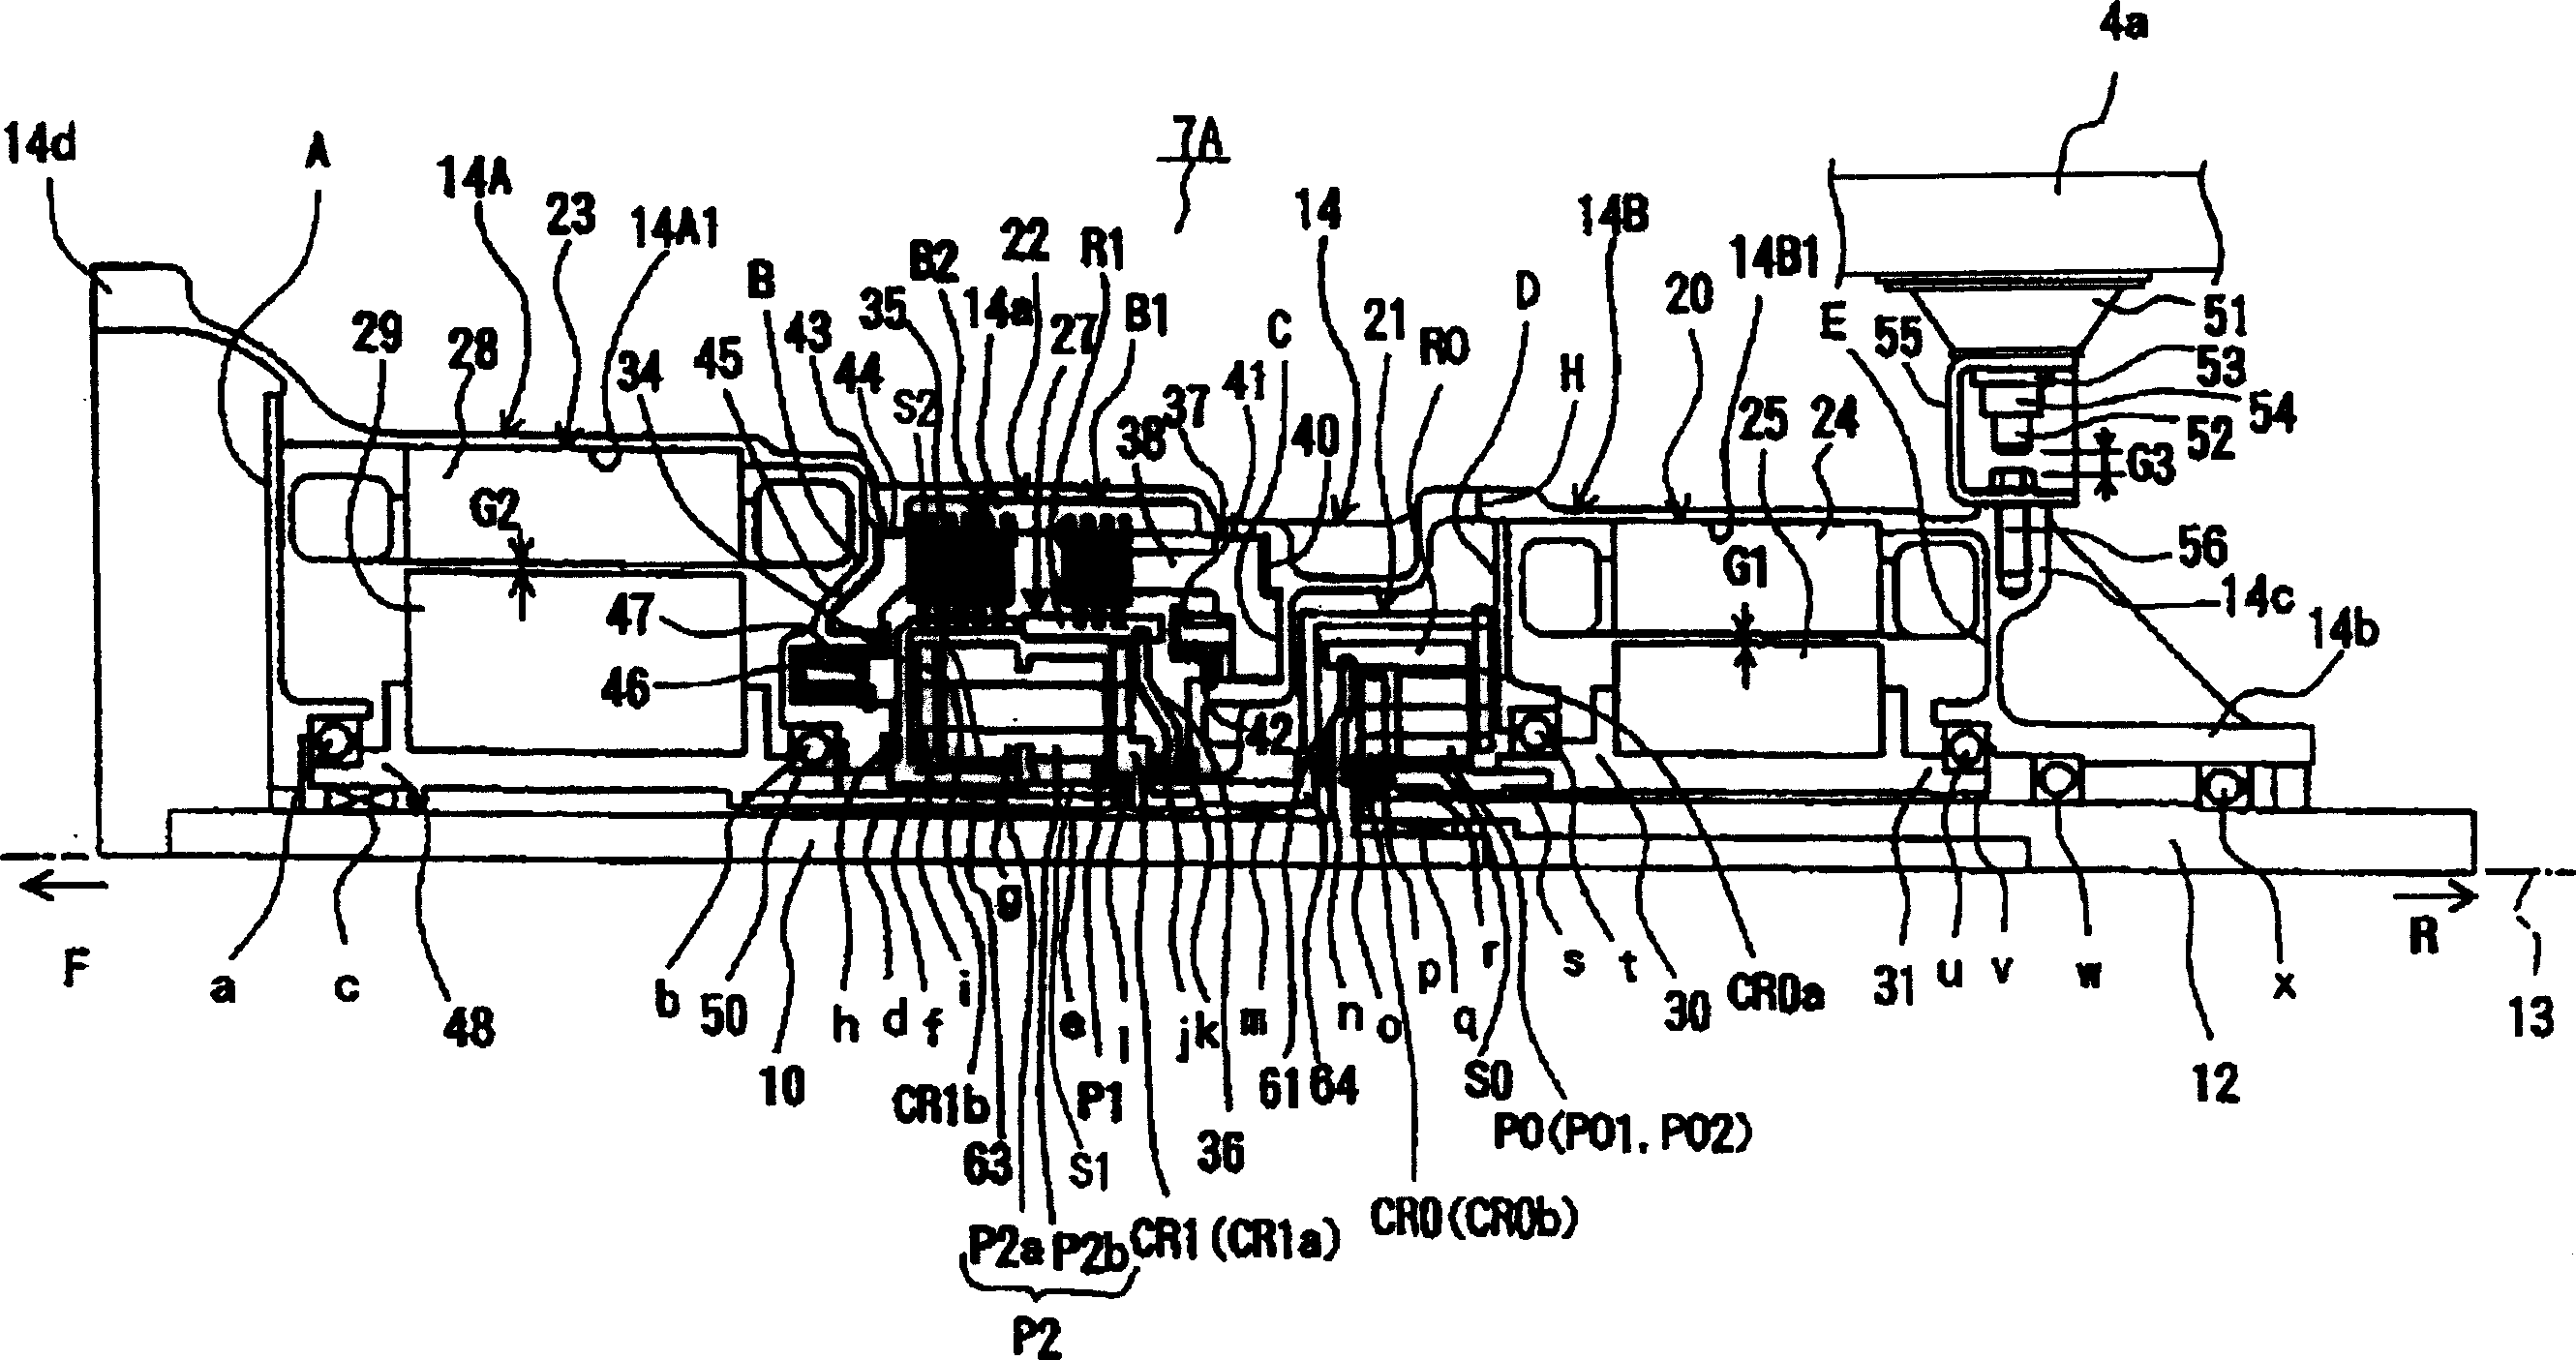 Hybrid drive device and automobile with device mounted thereon